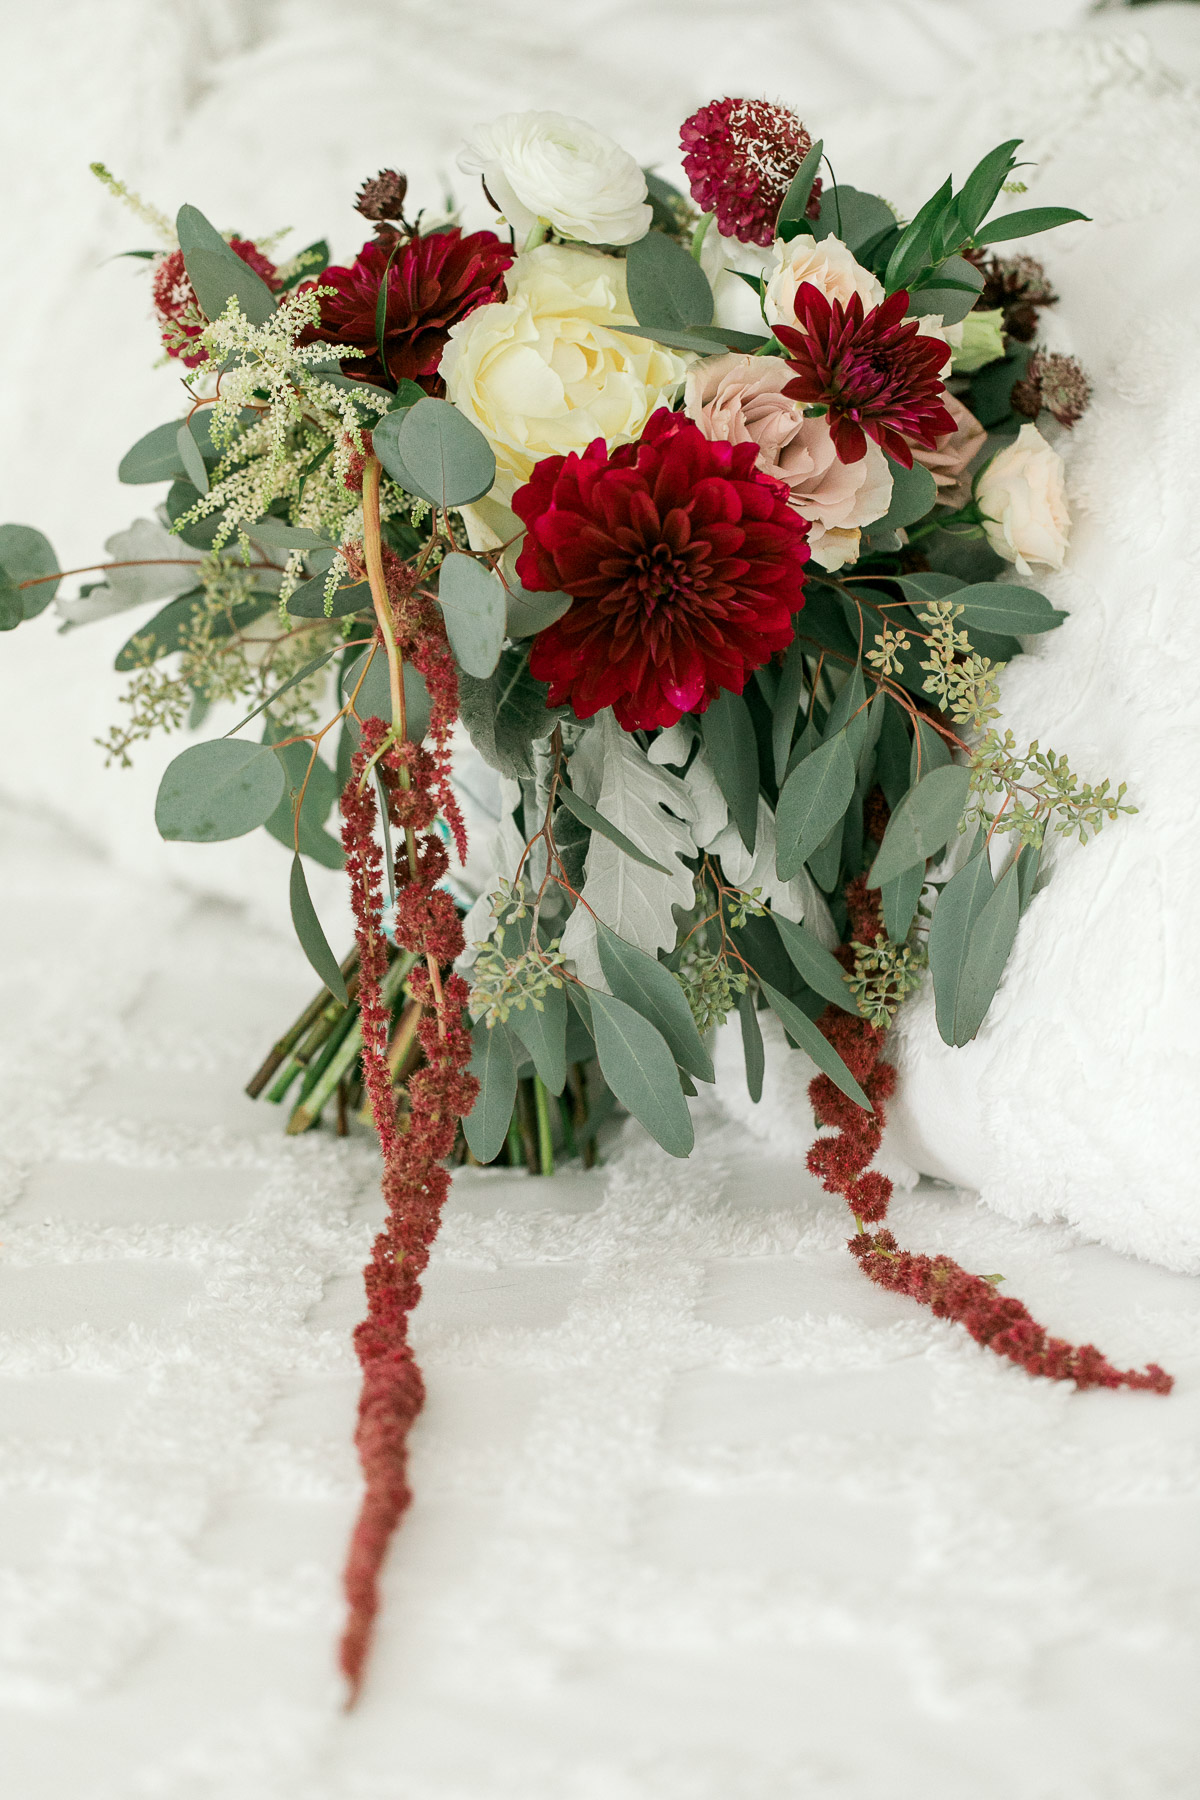 Deep red and light floral bouquet for vintage farm wedding theme